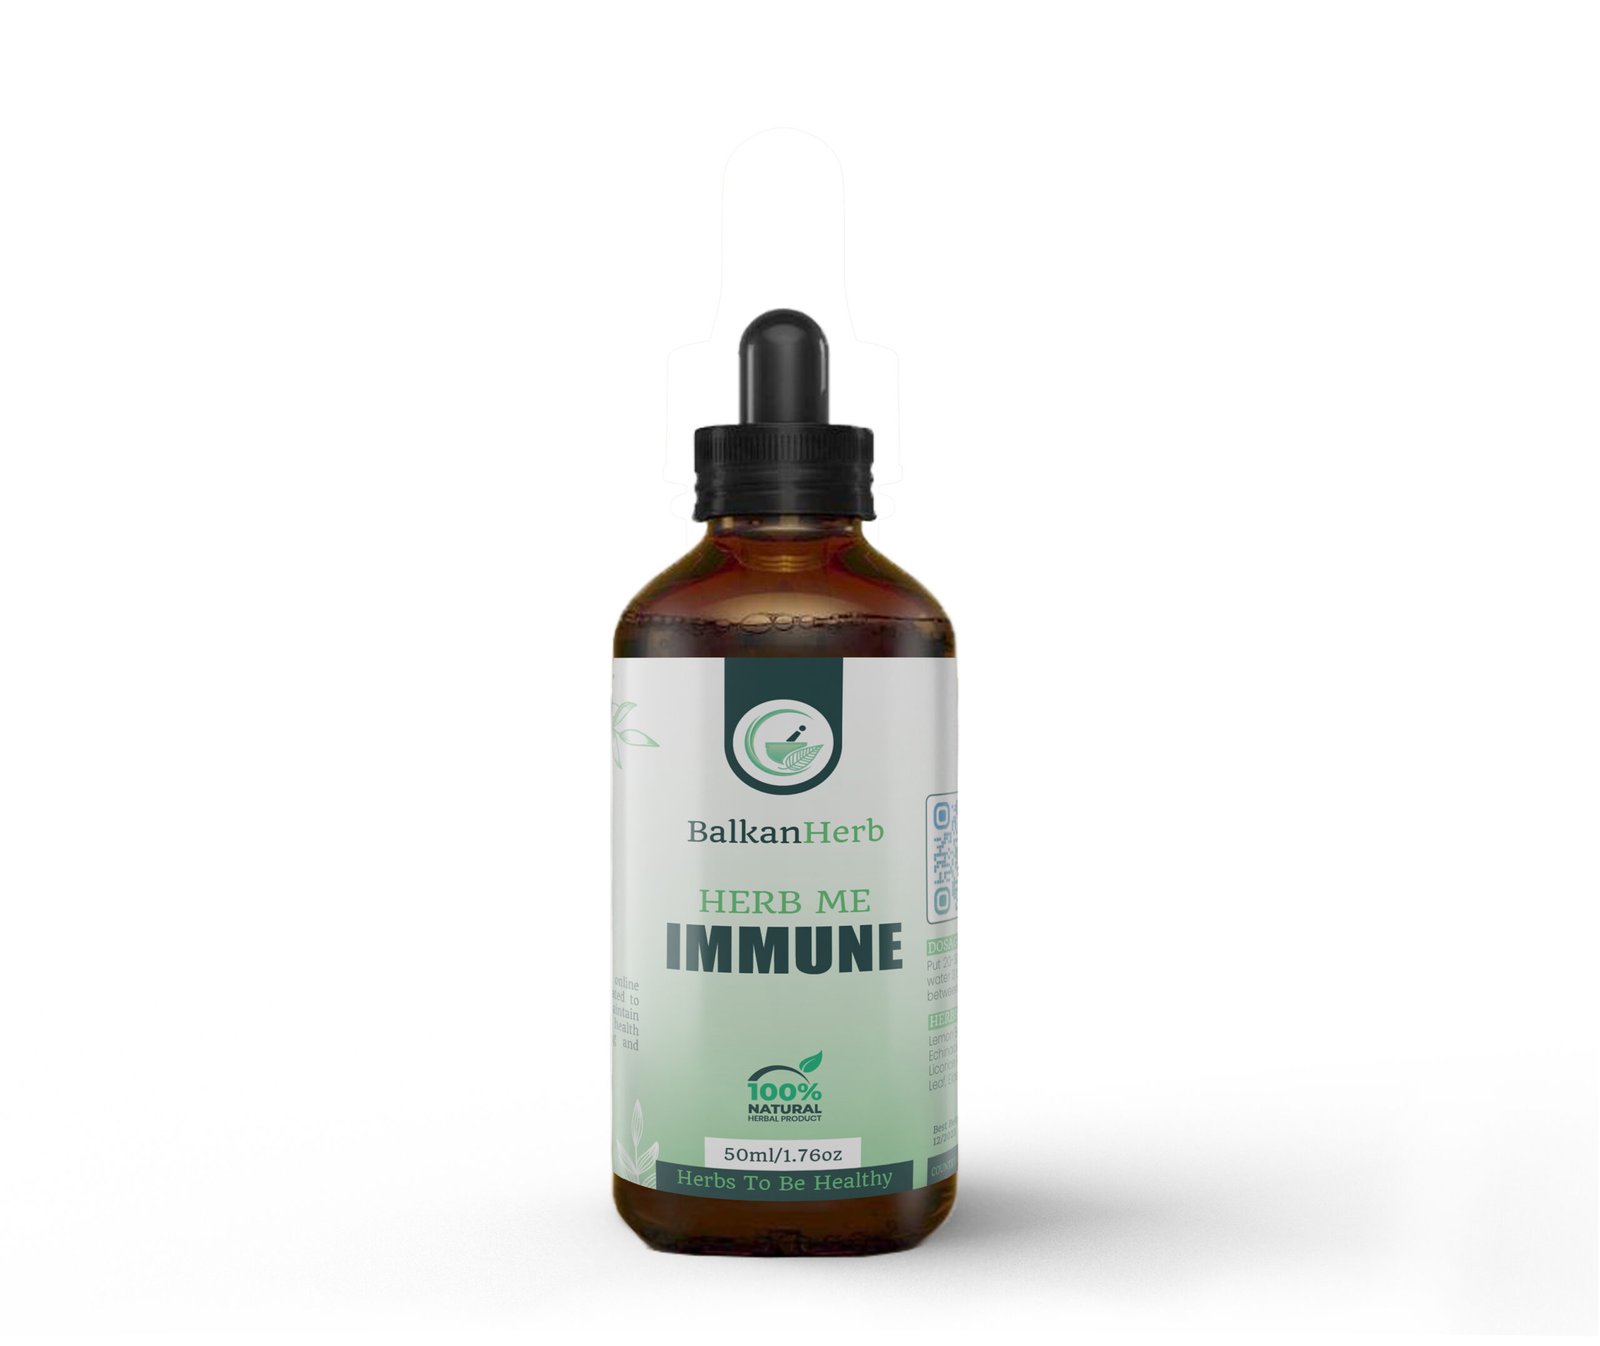 A showcase of a bottle of herbal extract formula for immune support by BalkanHerb